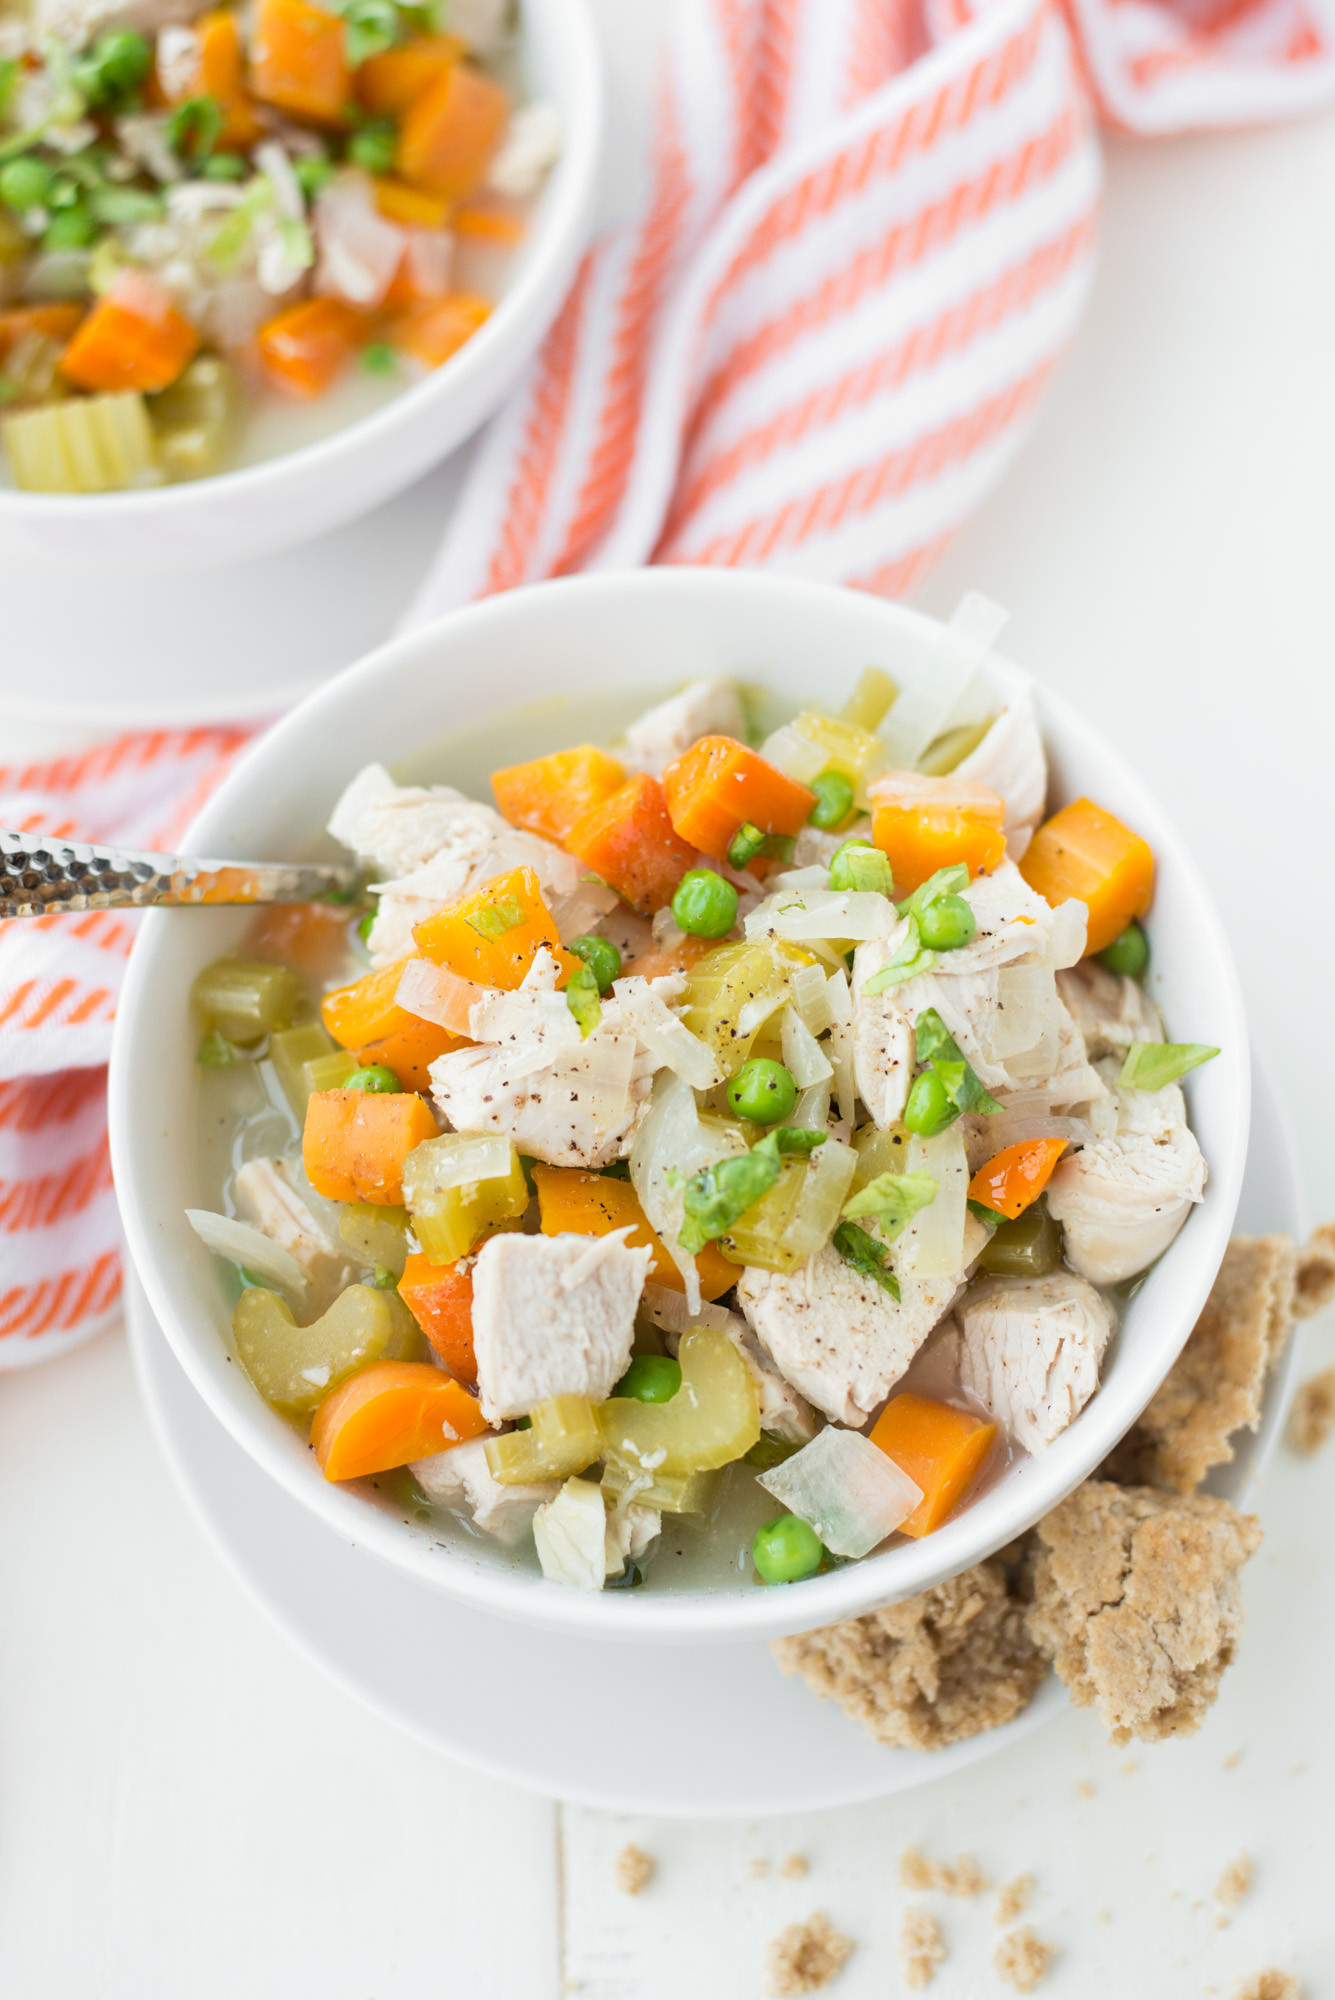 Slow Cooker Chicken Pot Pie Real Simple
 22 Simple Real Food Recipes You Should Make This Summer